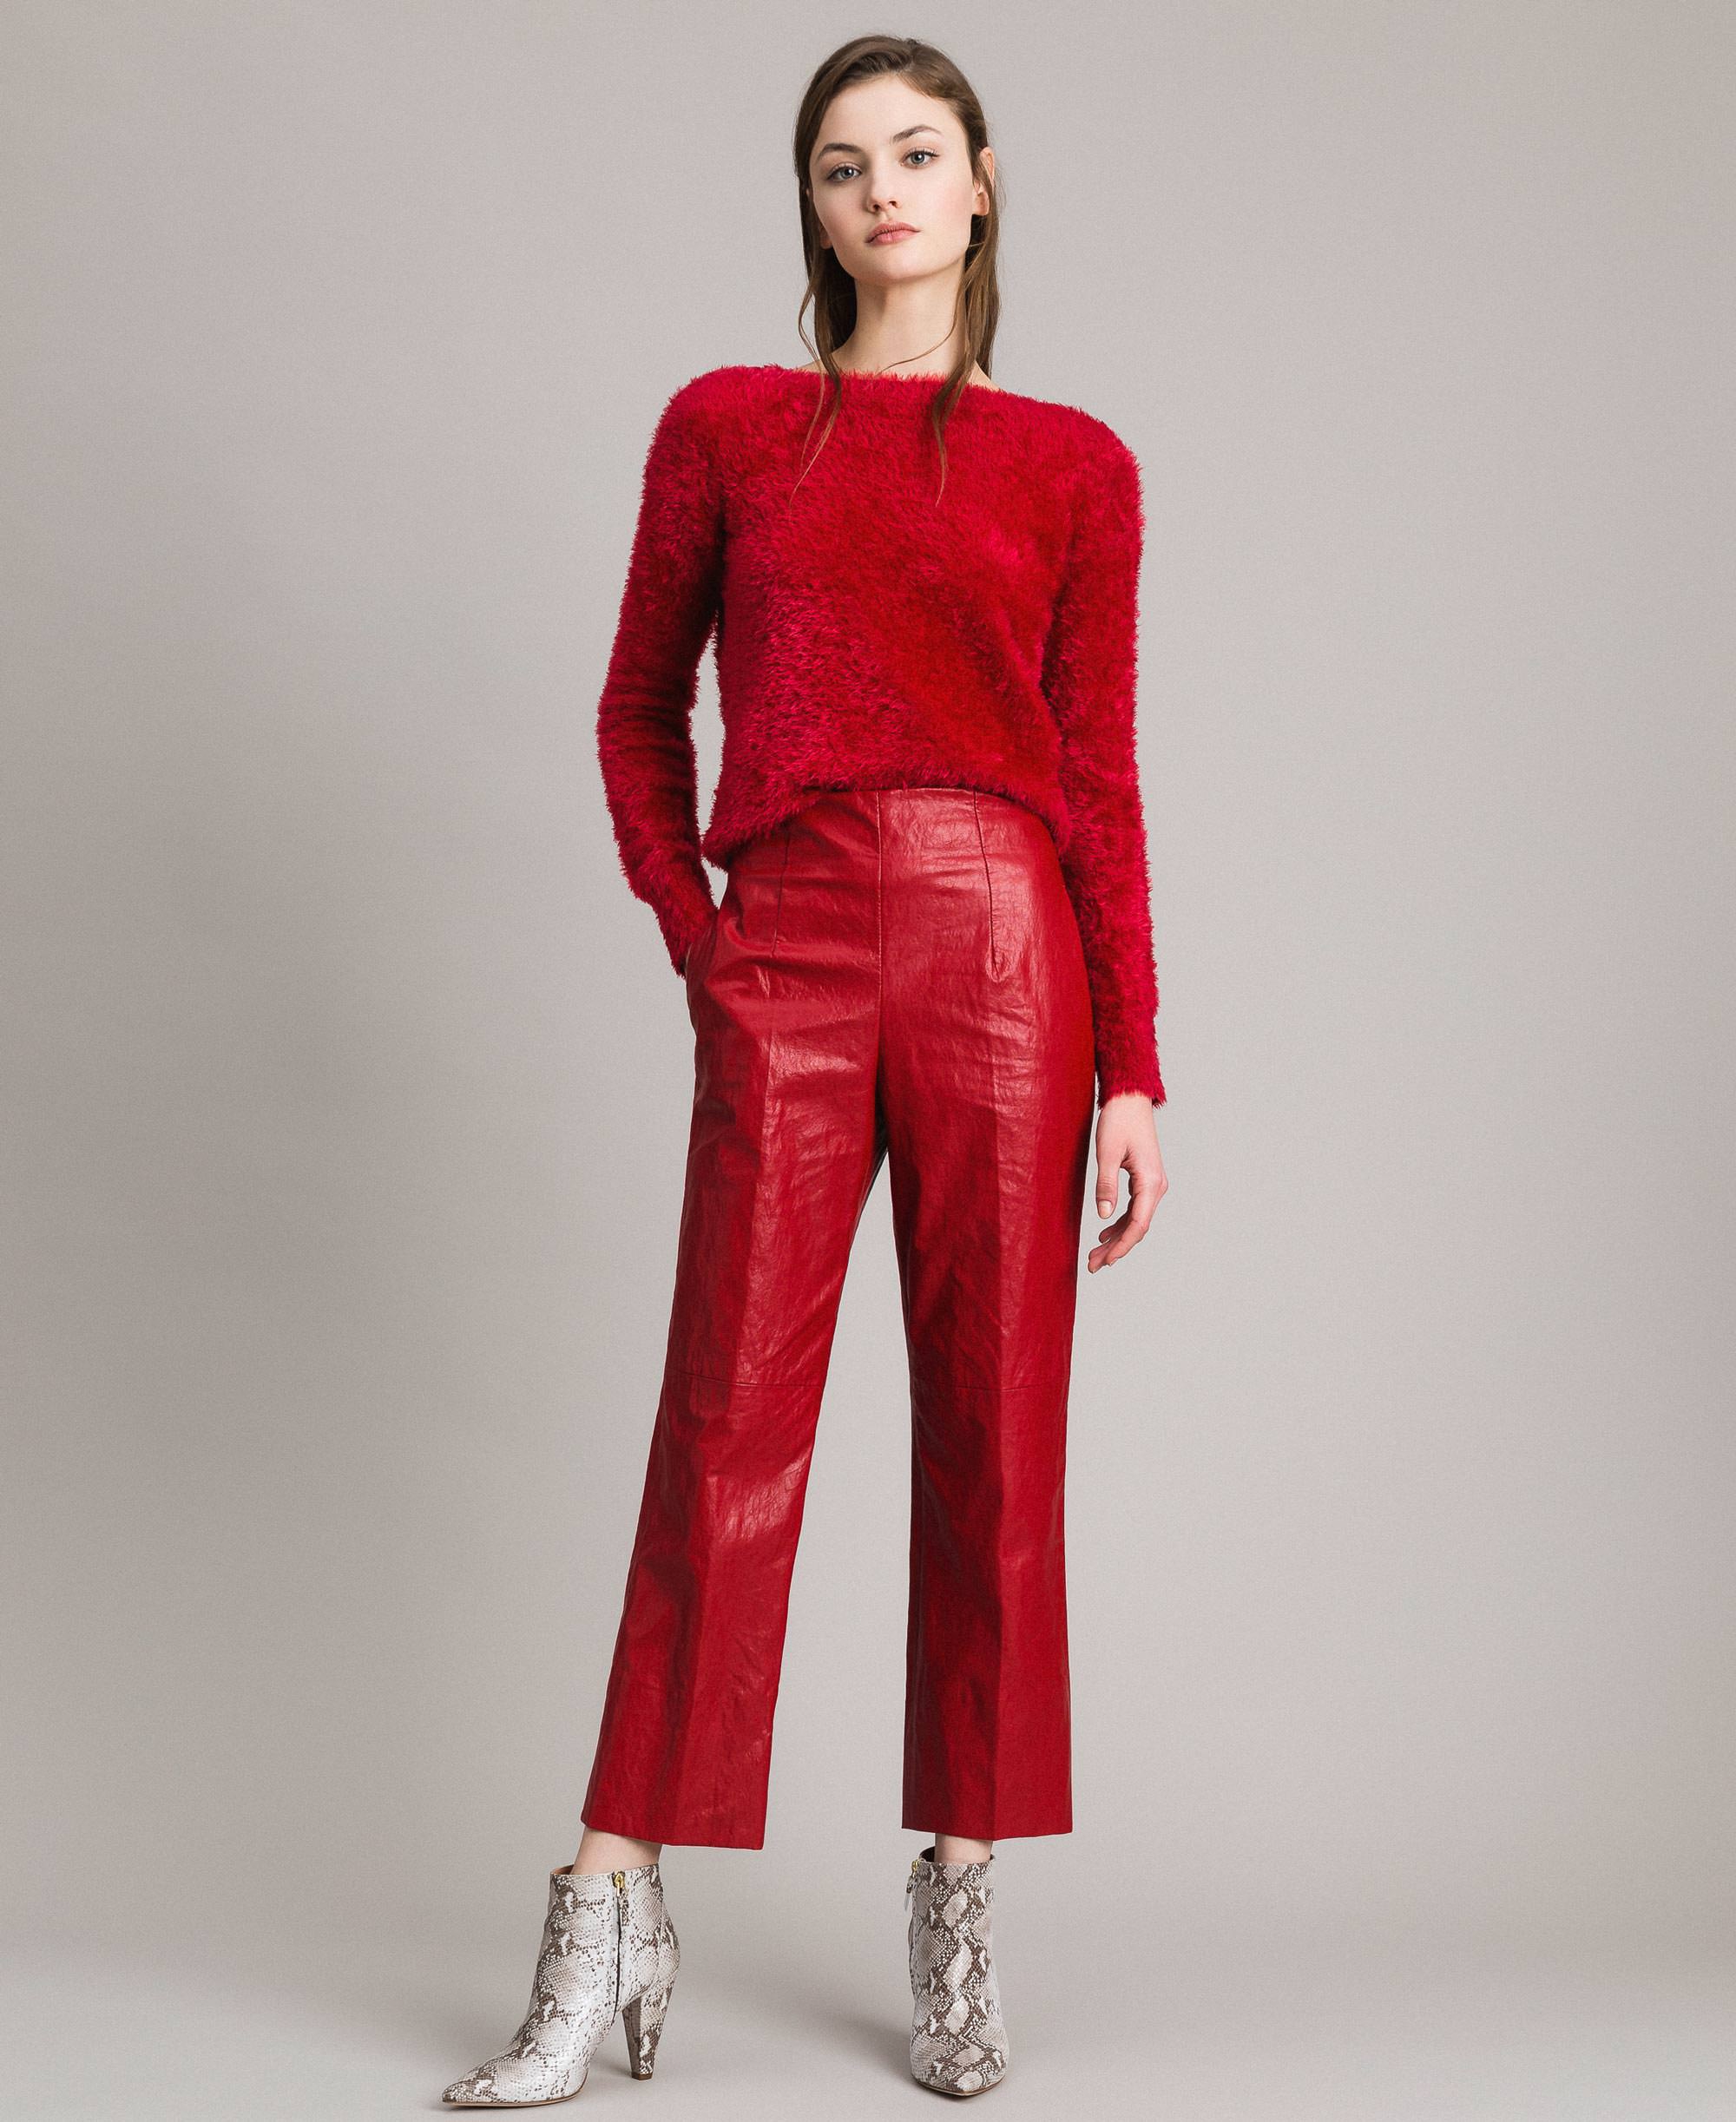 leather effect trousers